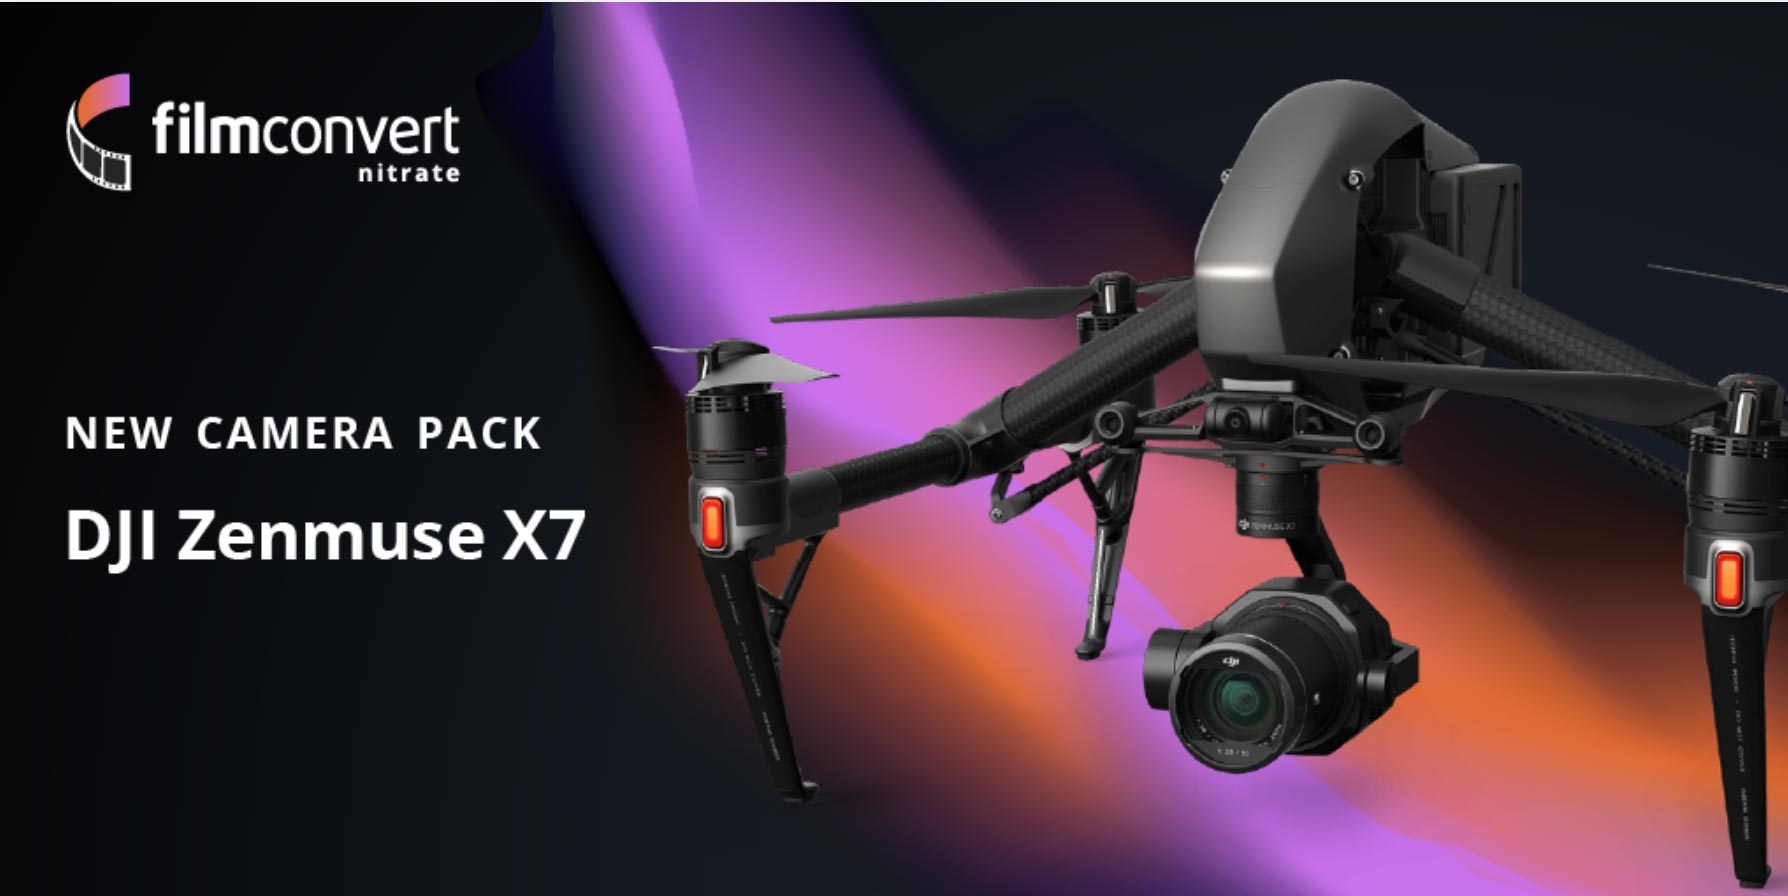 FilmConvert: new camera packs for DJI Zenmuse X5S and X7 cameras